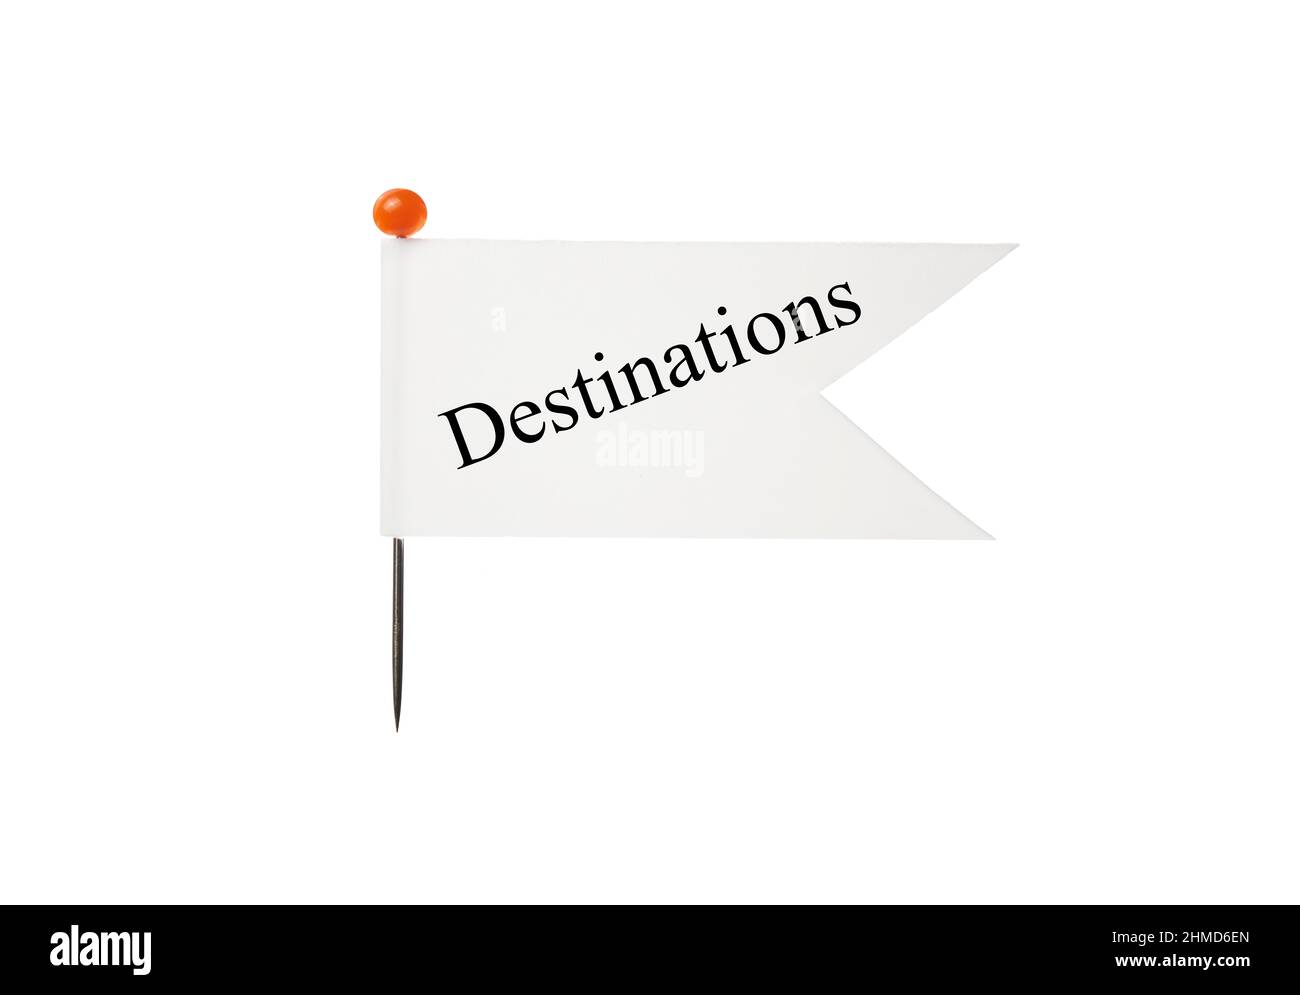 A flag with a white background that has the phrase Destinations attached to a pin that has a red top in front of a plain white background Stock Photo